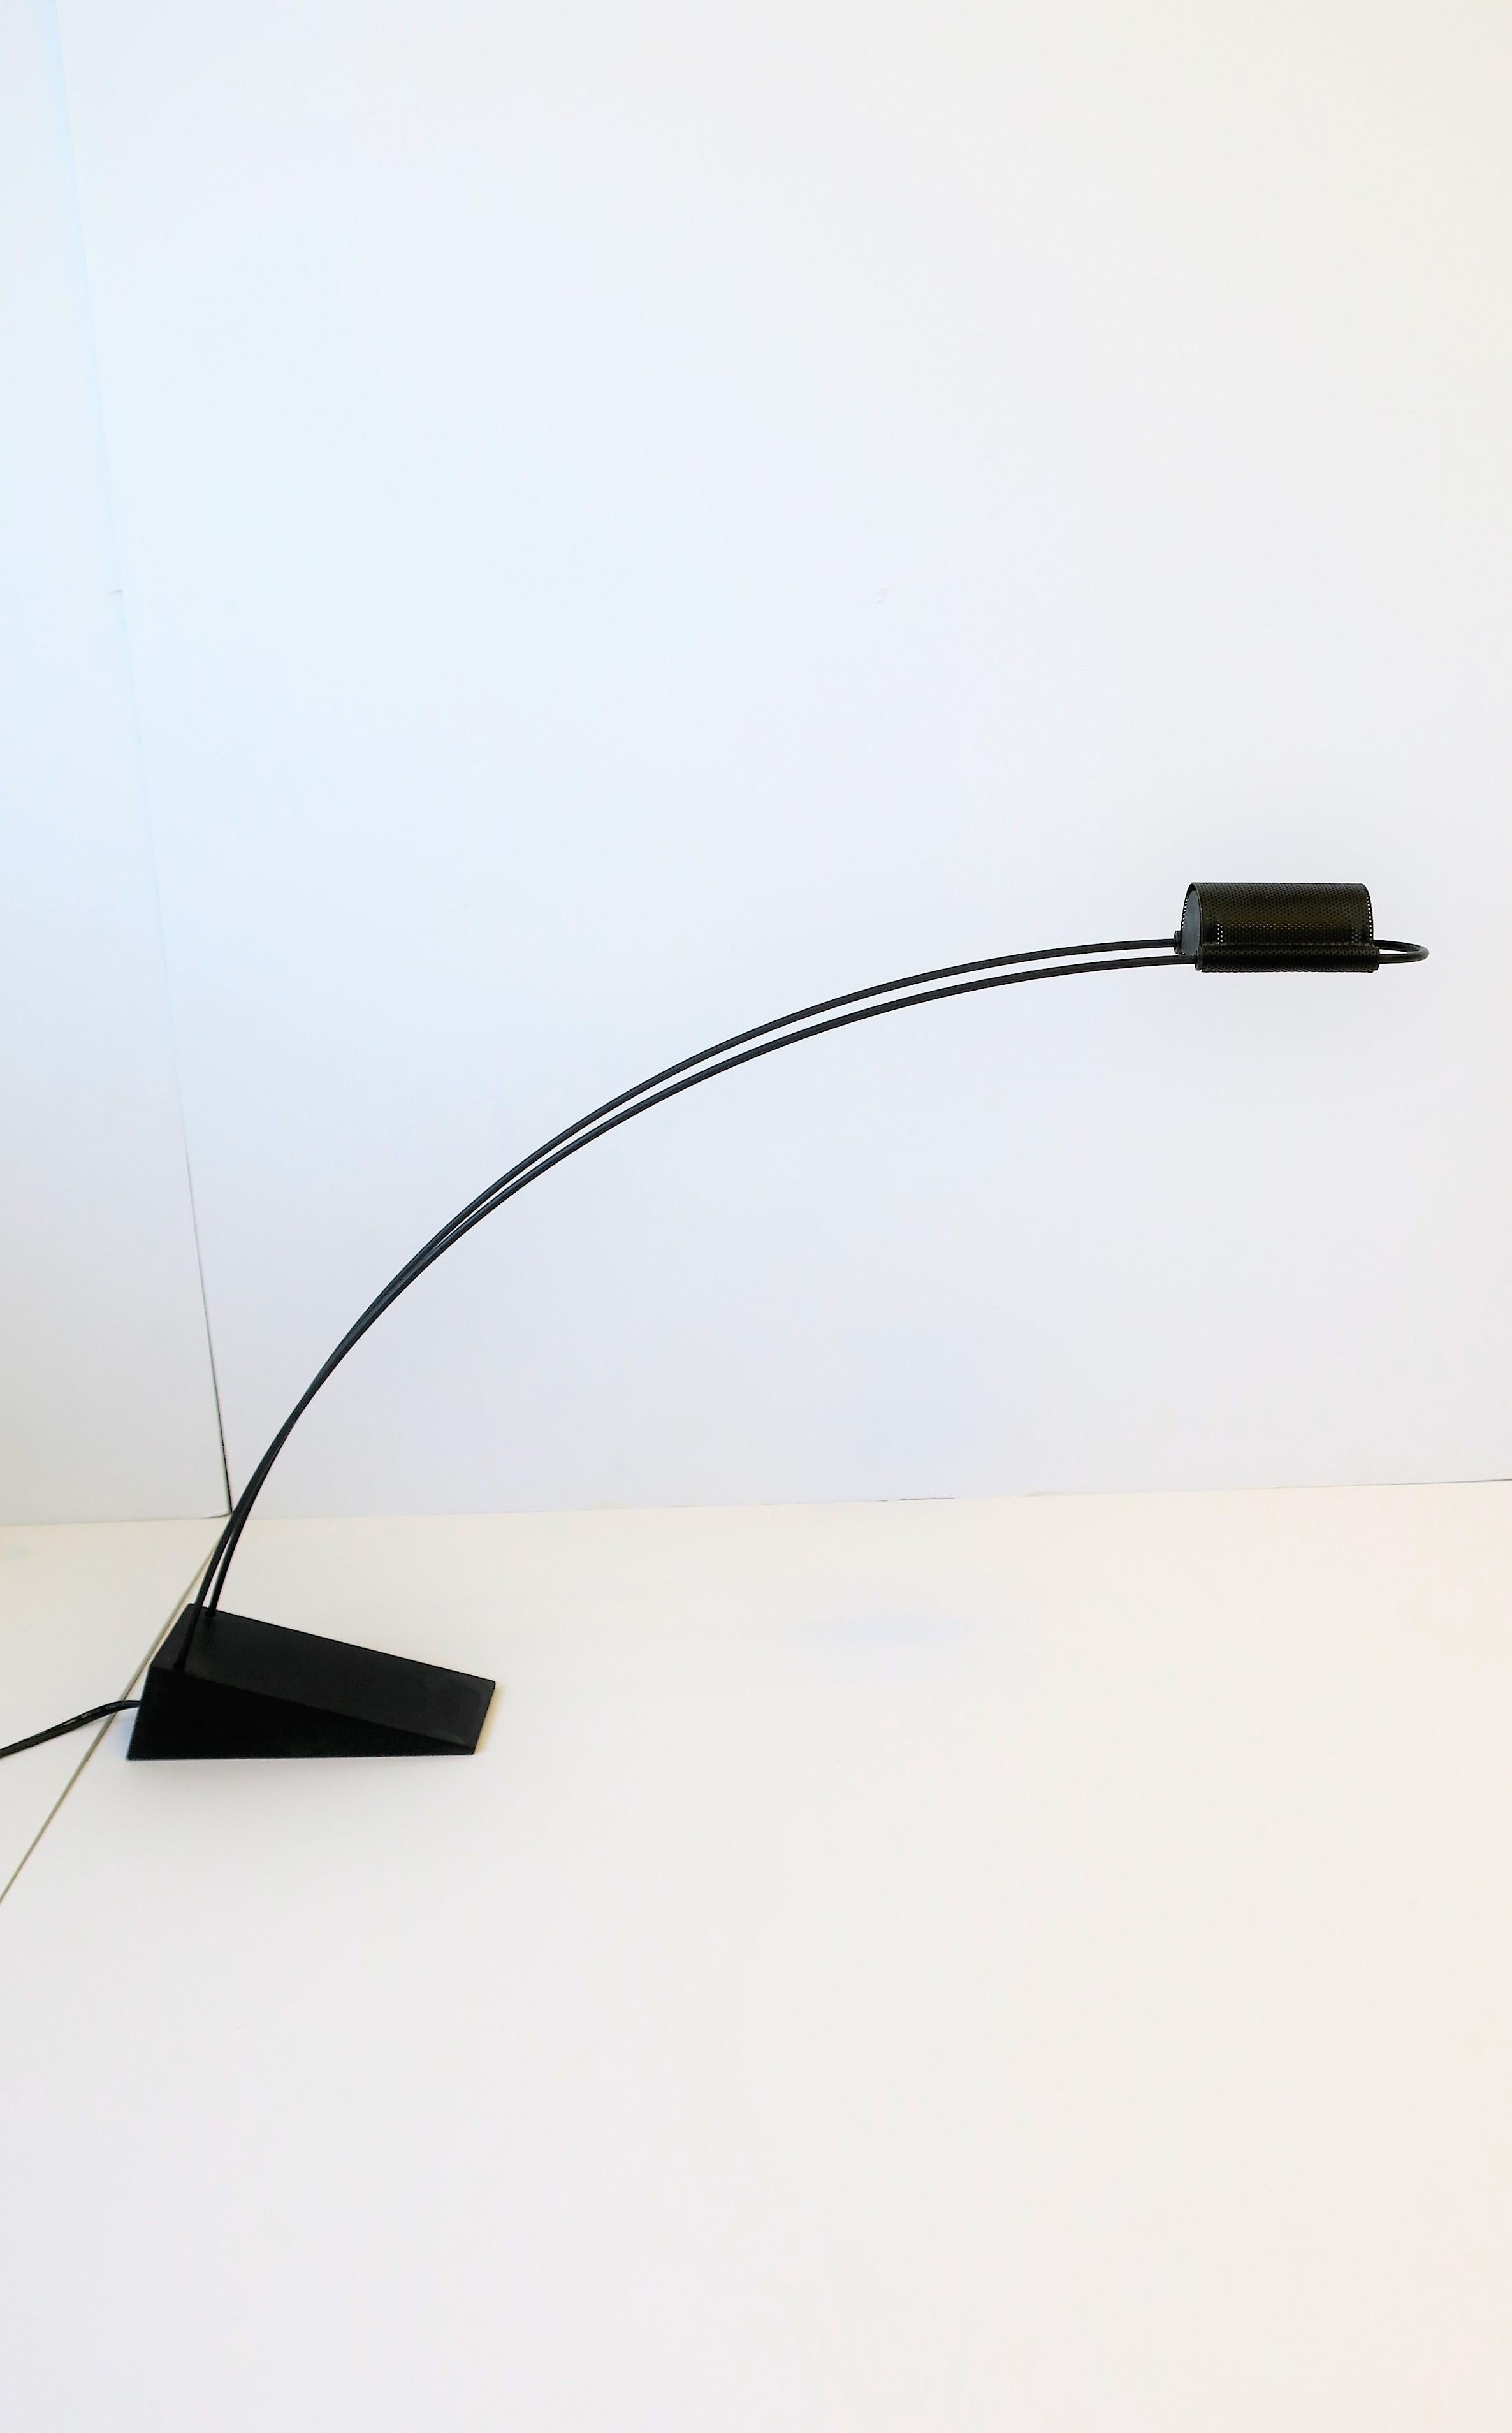 A designer black desk, task, or nightstand table lamp/light, Minimalist design period, 1988. Lamp is by designer Robert Sonneman for Robert Kovacs maker. With designer and makers' mark on bottom as shown in last image. Very good condition as shown